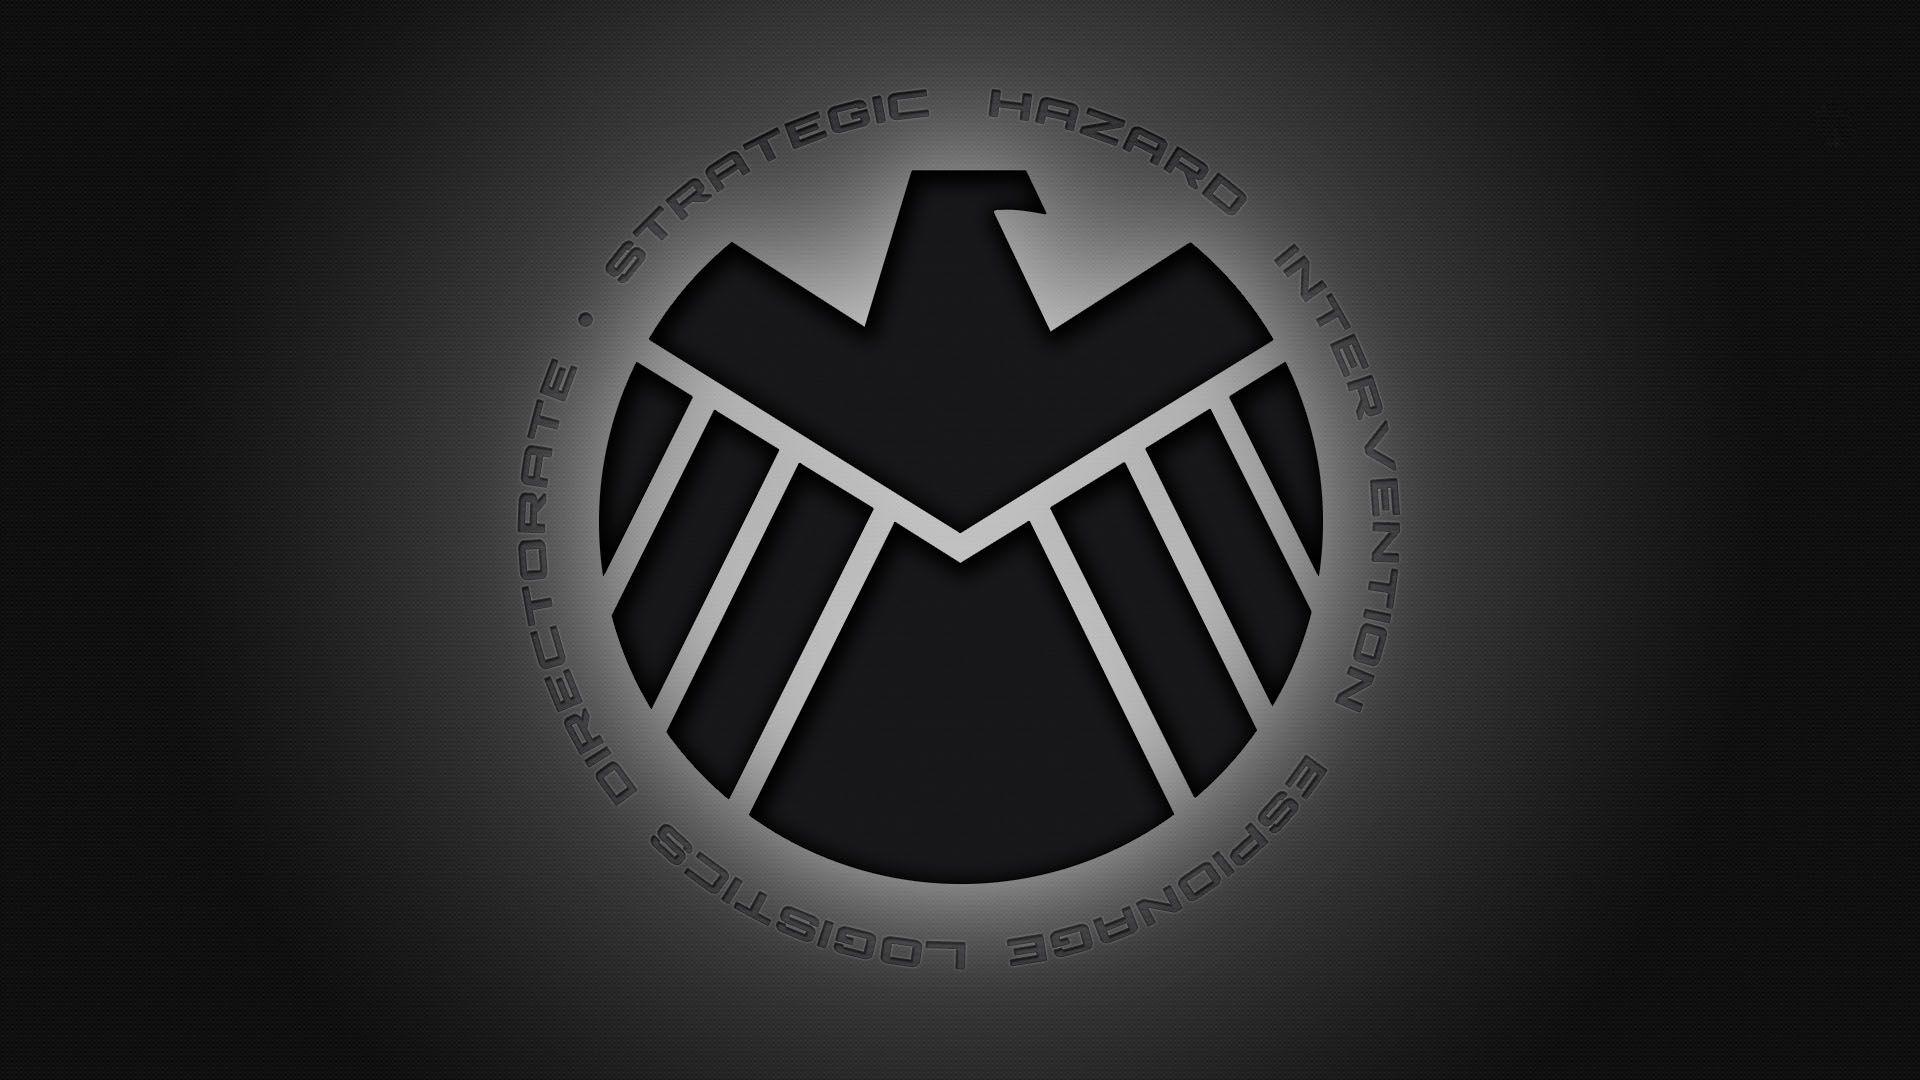 Marvels Agents Of S.H.I.E.L.D. HD Wallpaper. Background. Free